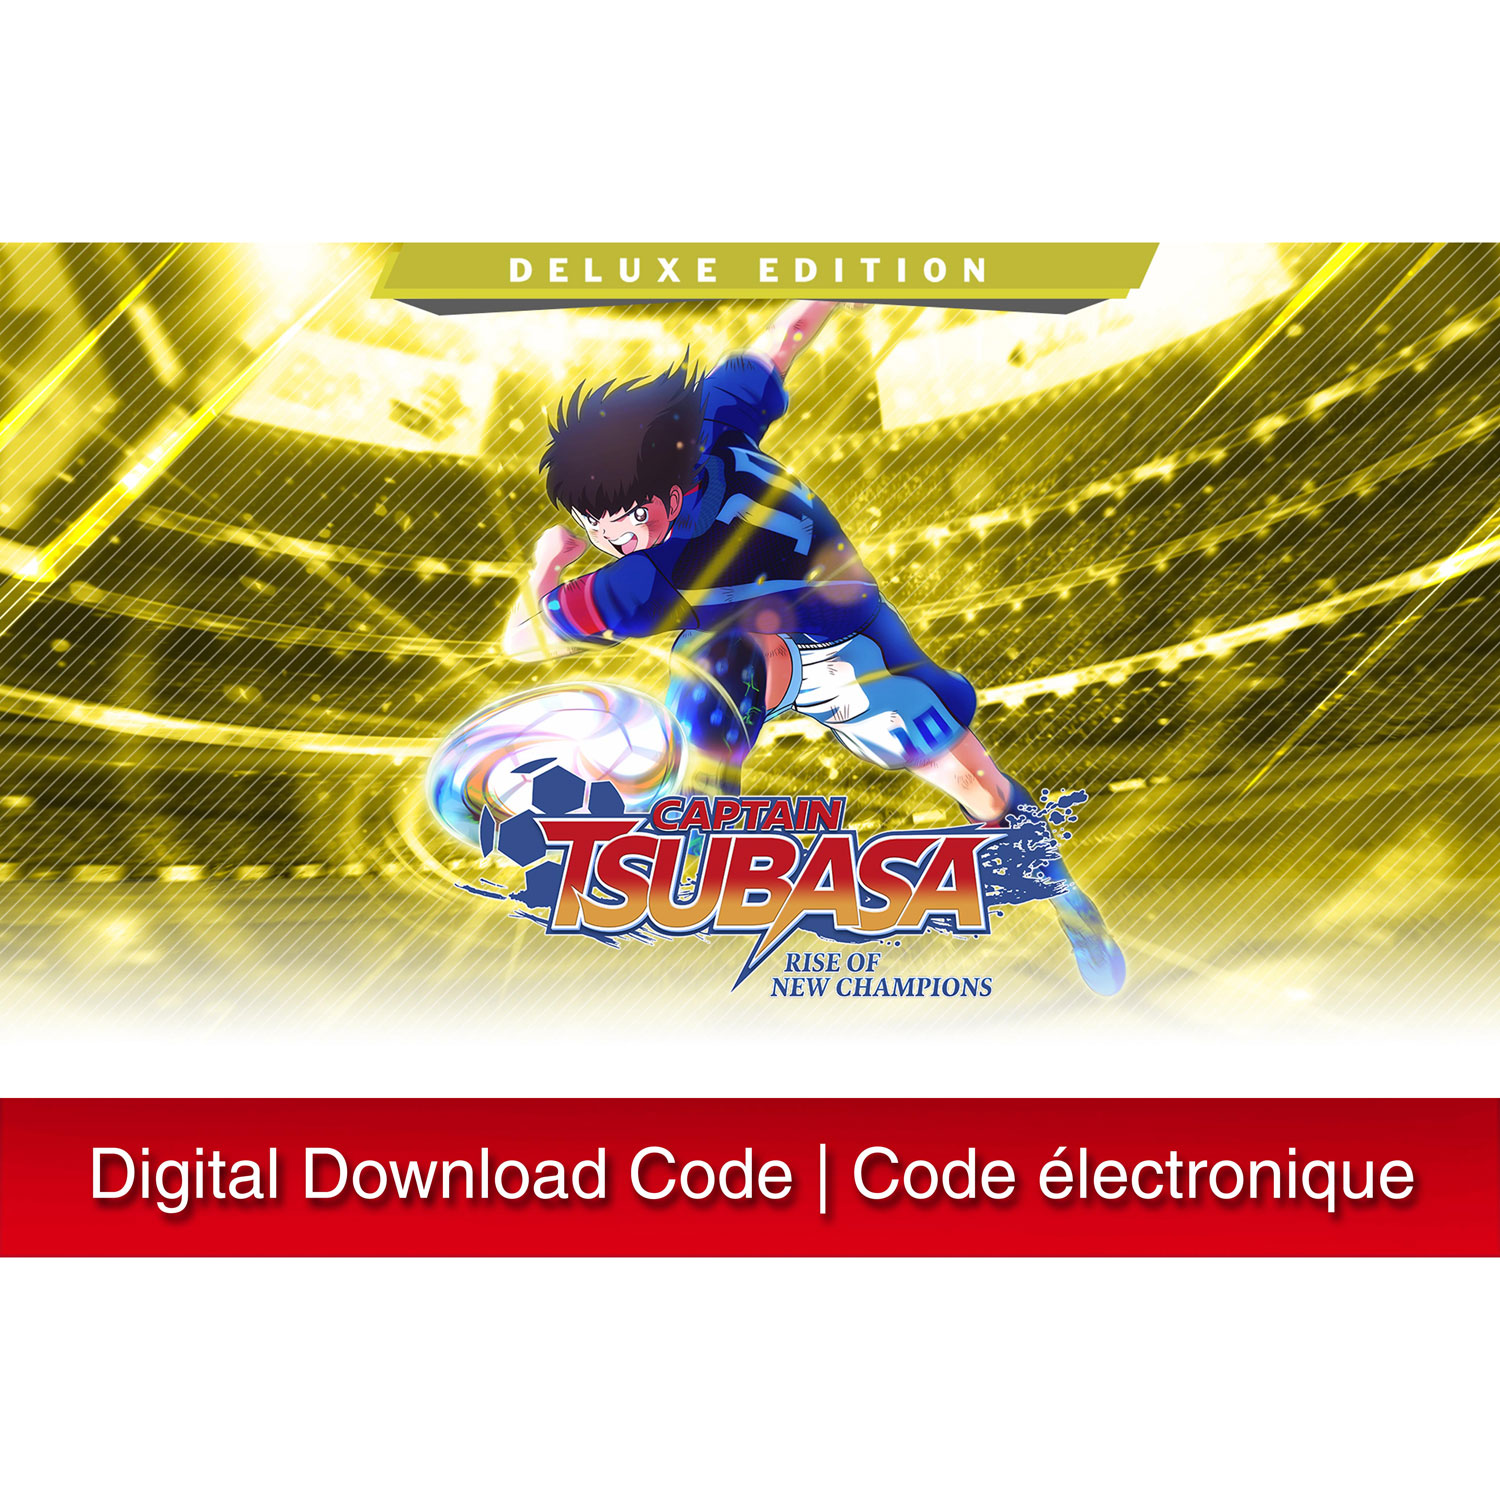 Captain Tsubasa: Rise of New Champions Deluxe Edition (Switch) - Digital Download